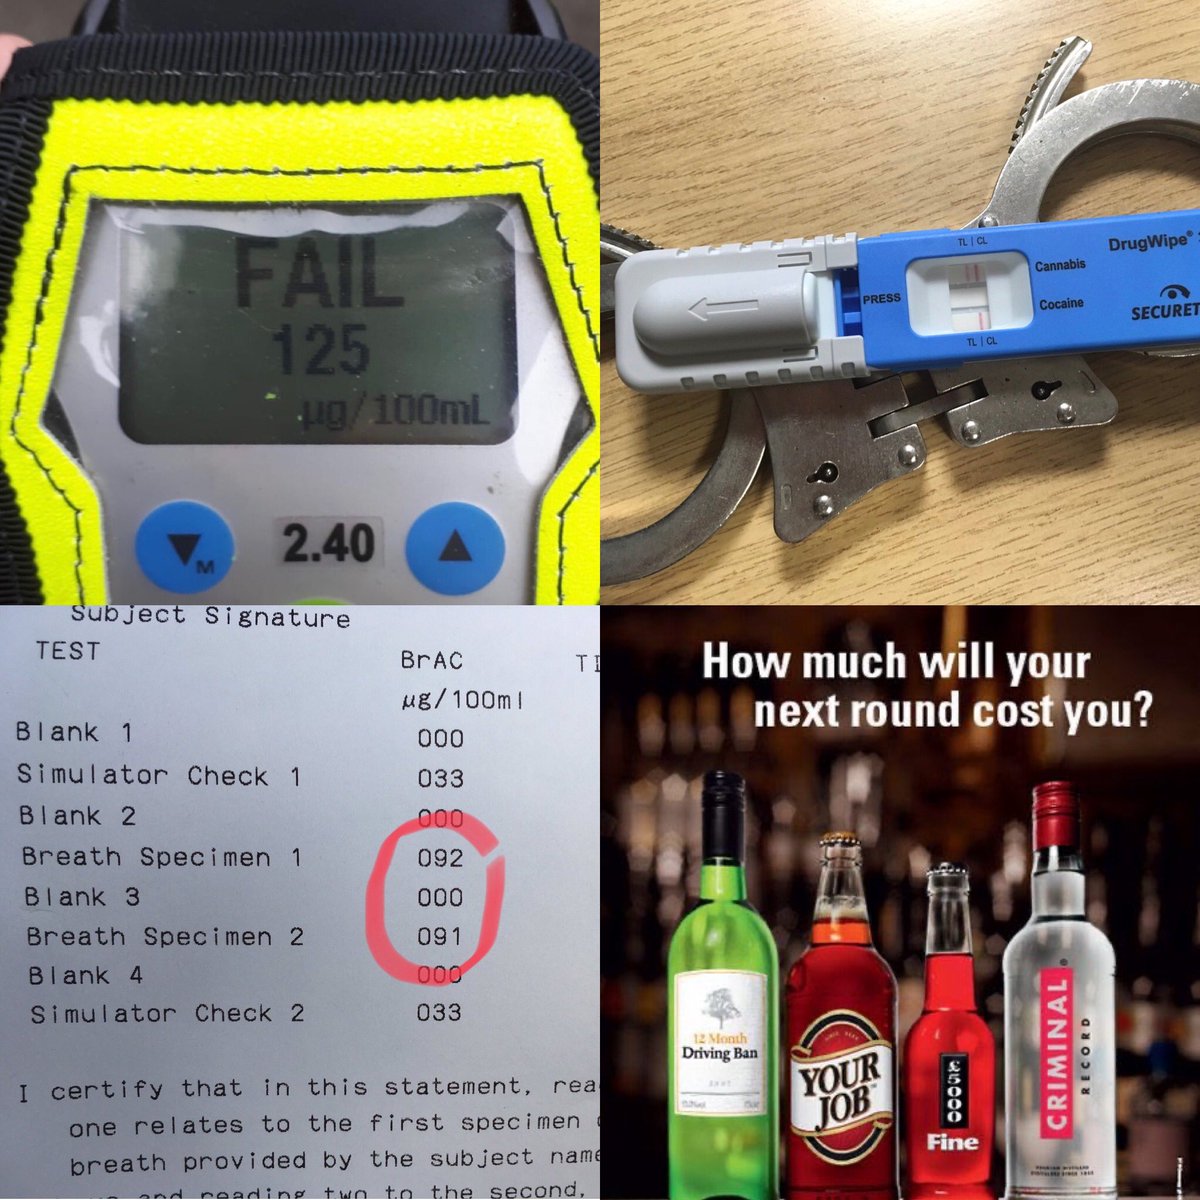 Last night Team C in #Telford took 5 incapable drivers off the road!

1 tried to get out of the car with the seatbelt still on 🤦🏻‍♂️

3 #Arrested for #DrinkDrive
2 #Arrested for #DrugDrive

5 in the cells
5 off to court
5 driving bans pending
5 less idiots on the road

20450
#Fatal4